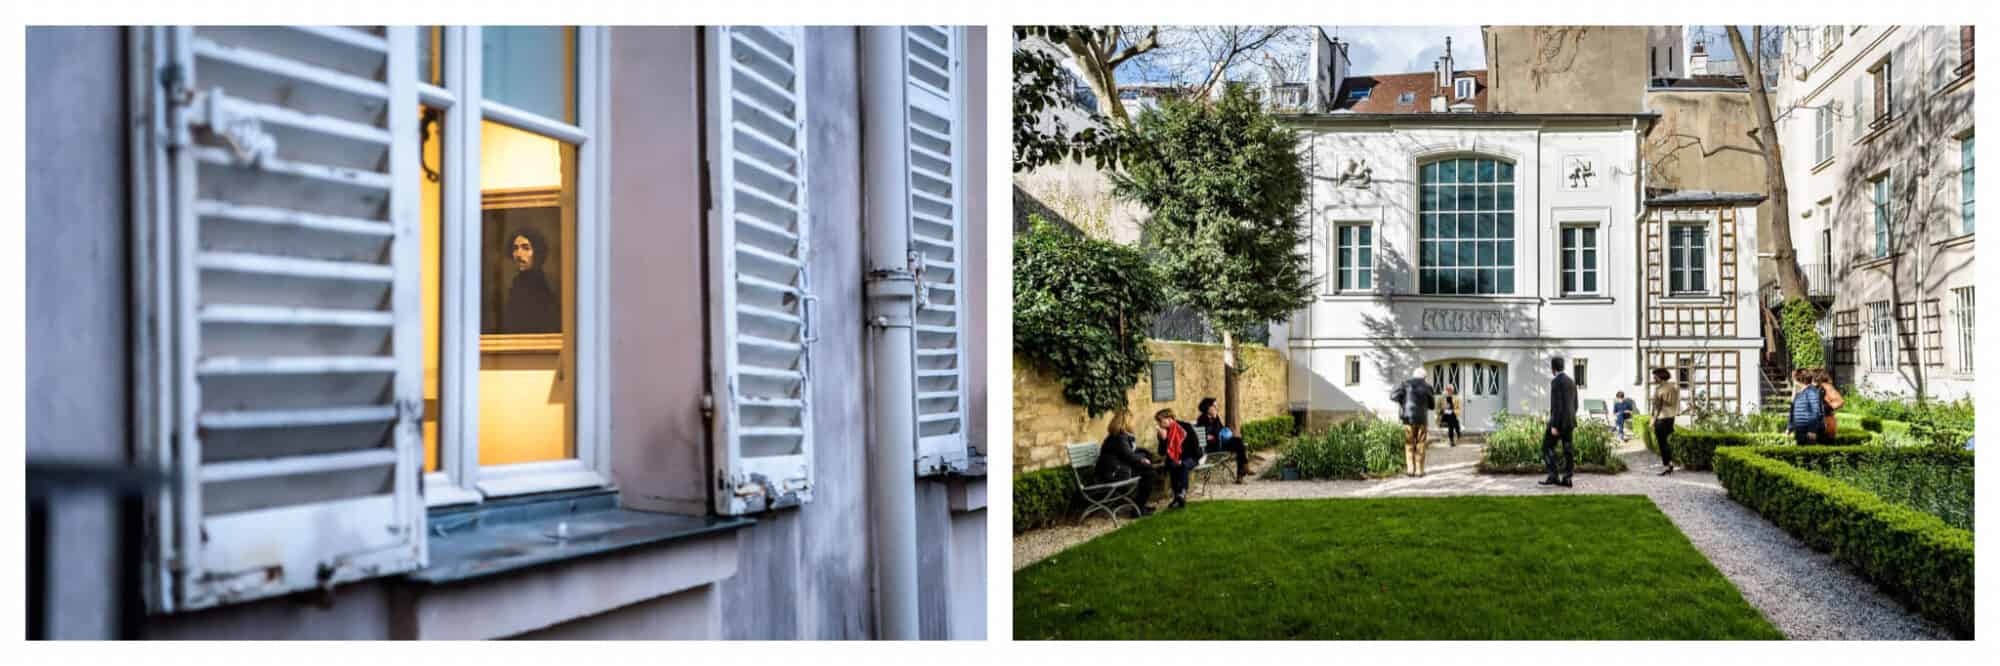 Left, a glimpse inside artist Eugene Delacroix's former residence, now a museum. Right, the gardens of the museum in Paris.